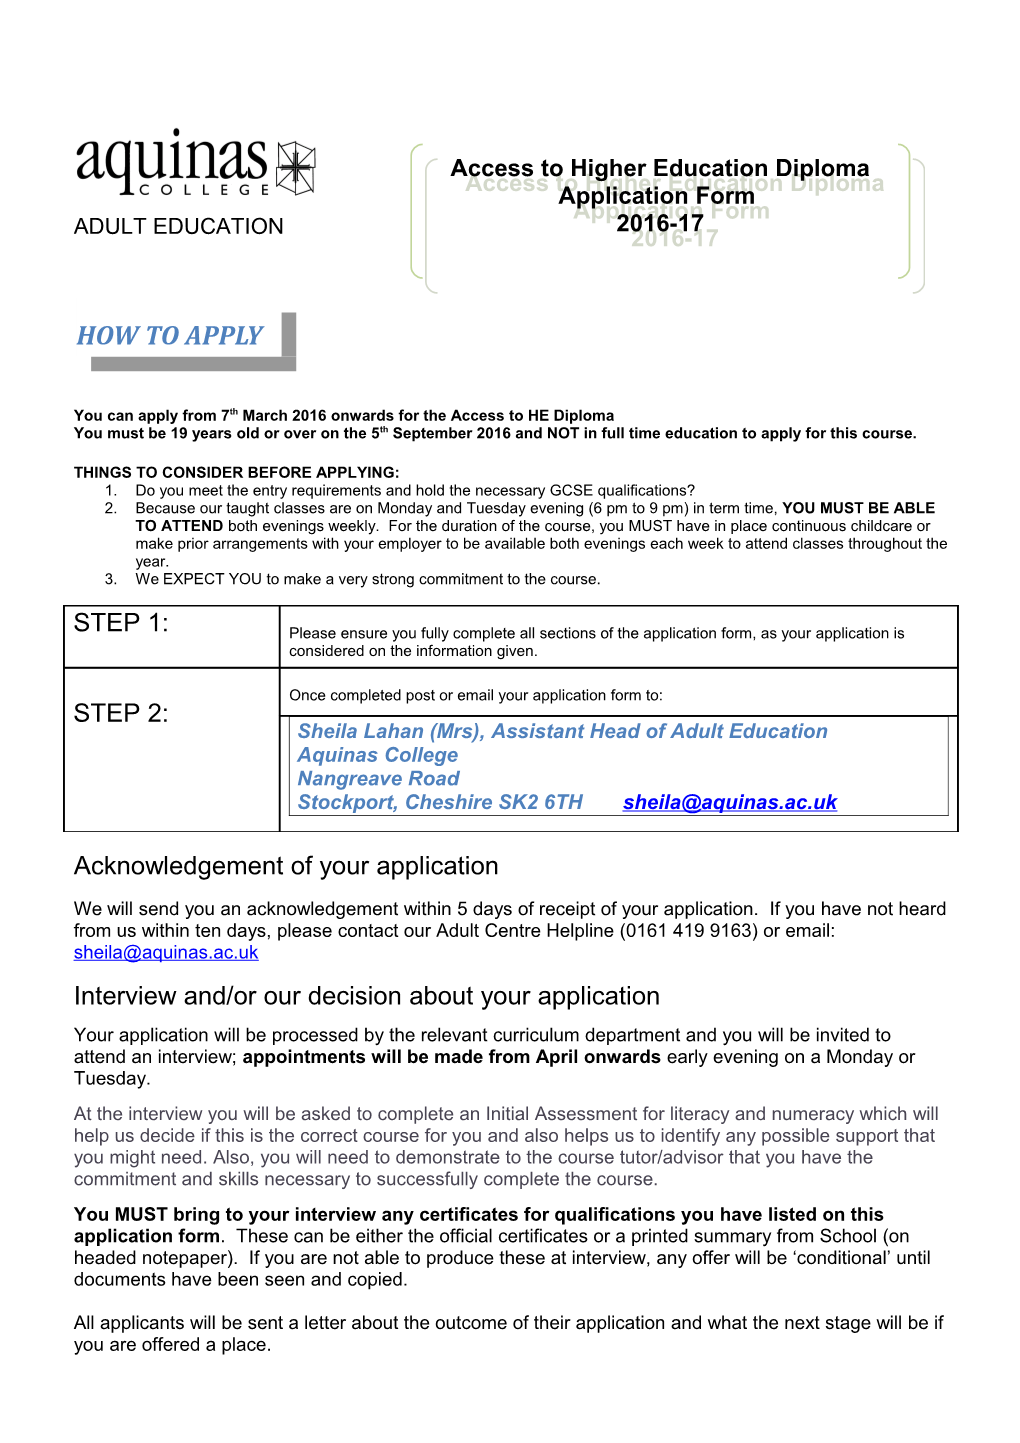 Access to Higher Education Diploma